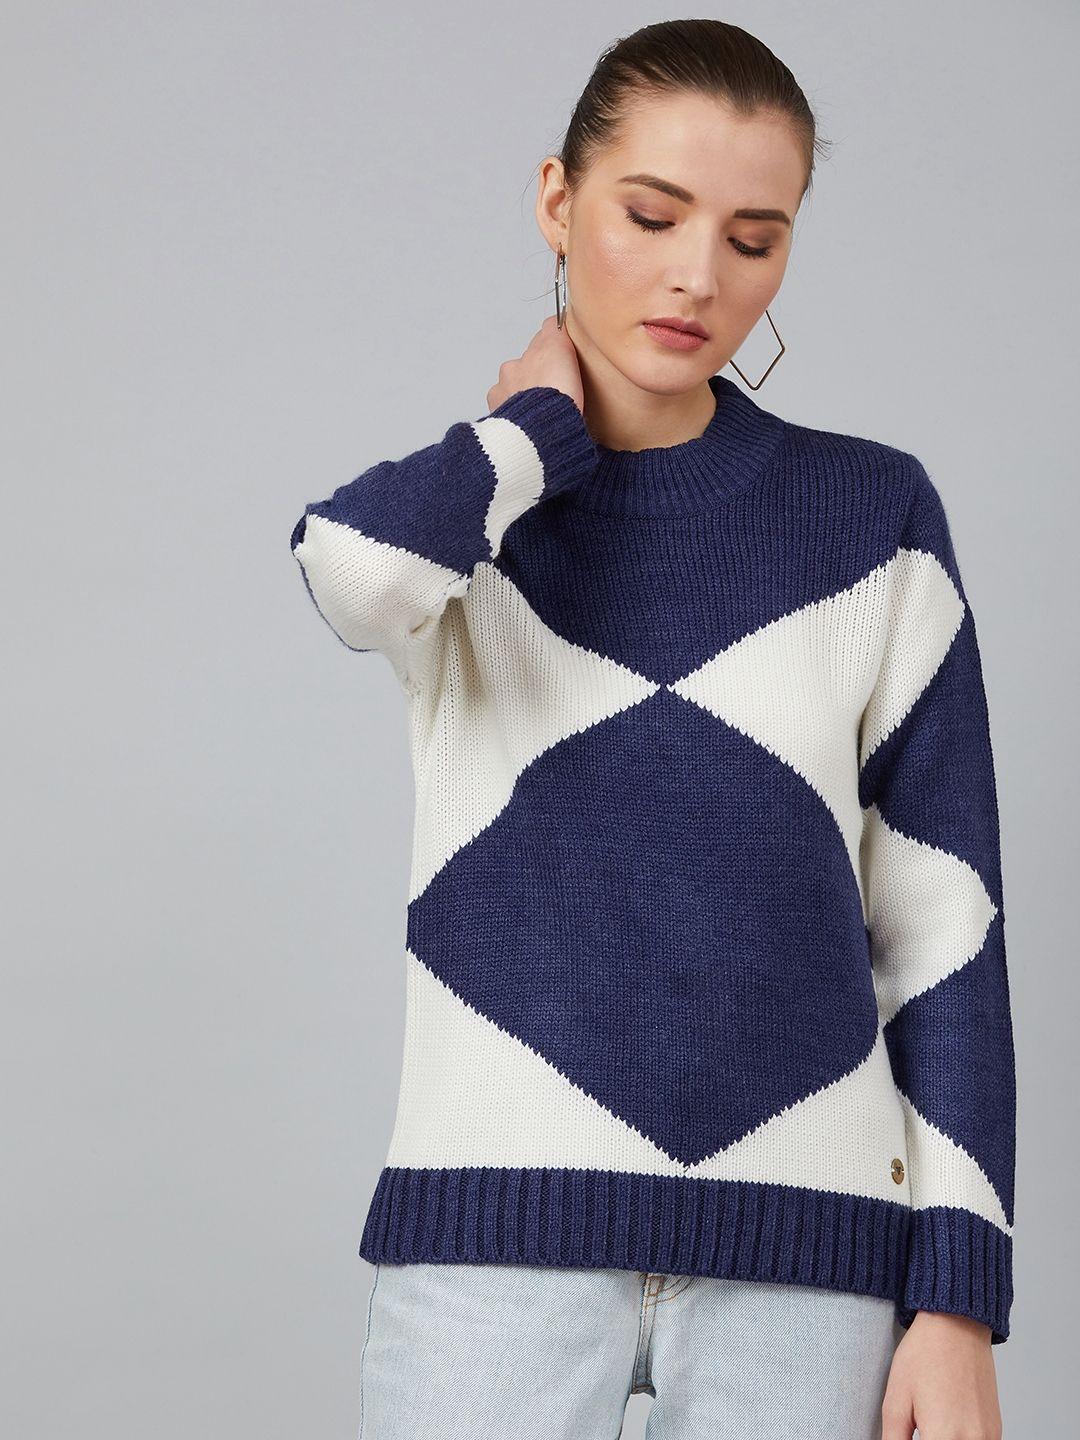 cayman-women-navy-blue-&-white-printed-pullover-sweater